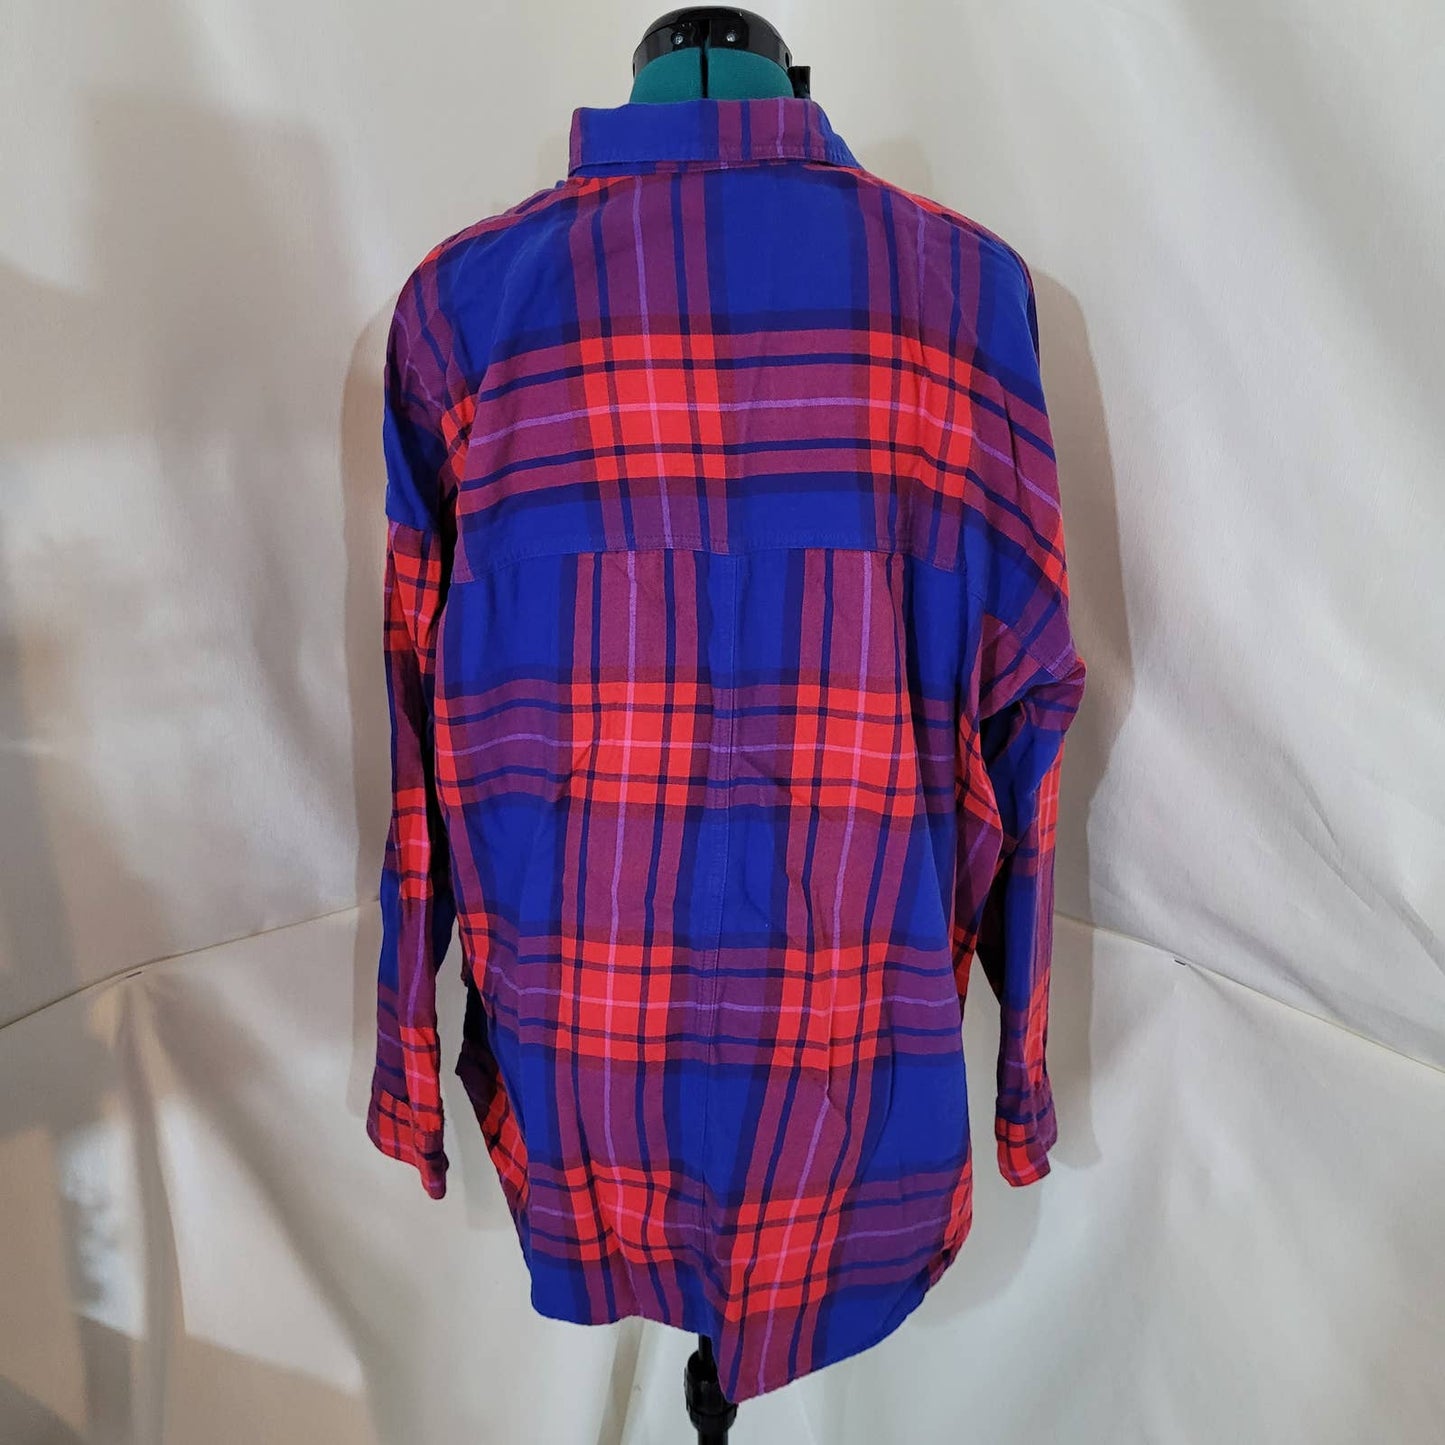 Old Navy Blue and Red Plaid Boyfriend Shirt - Size Extra Large